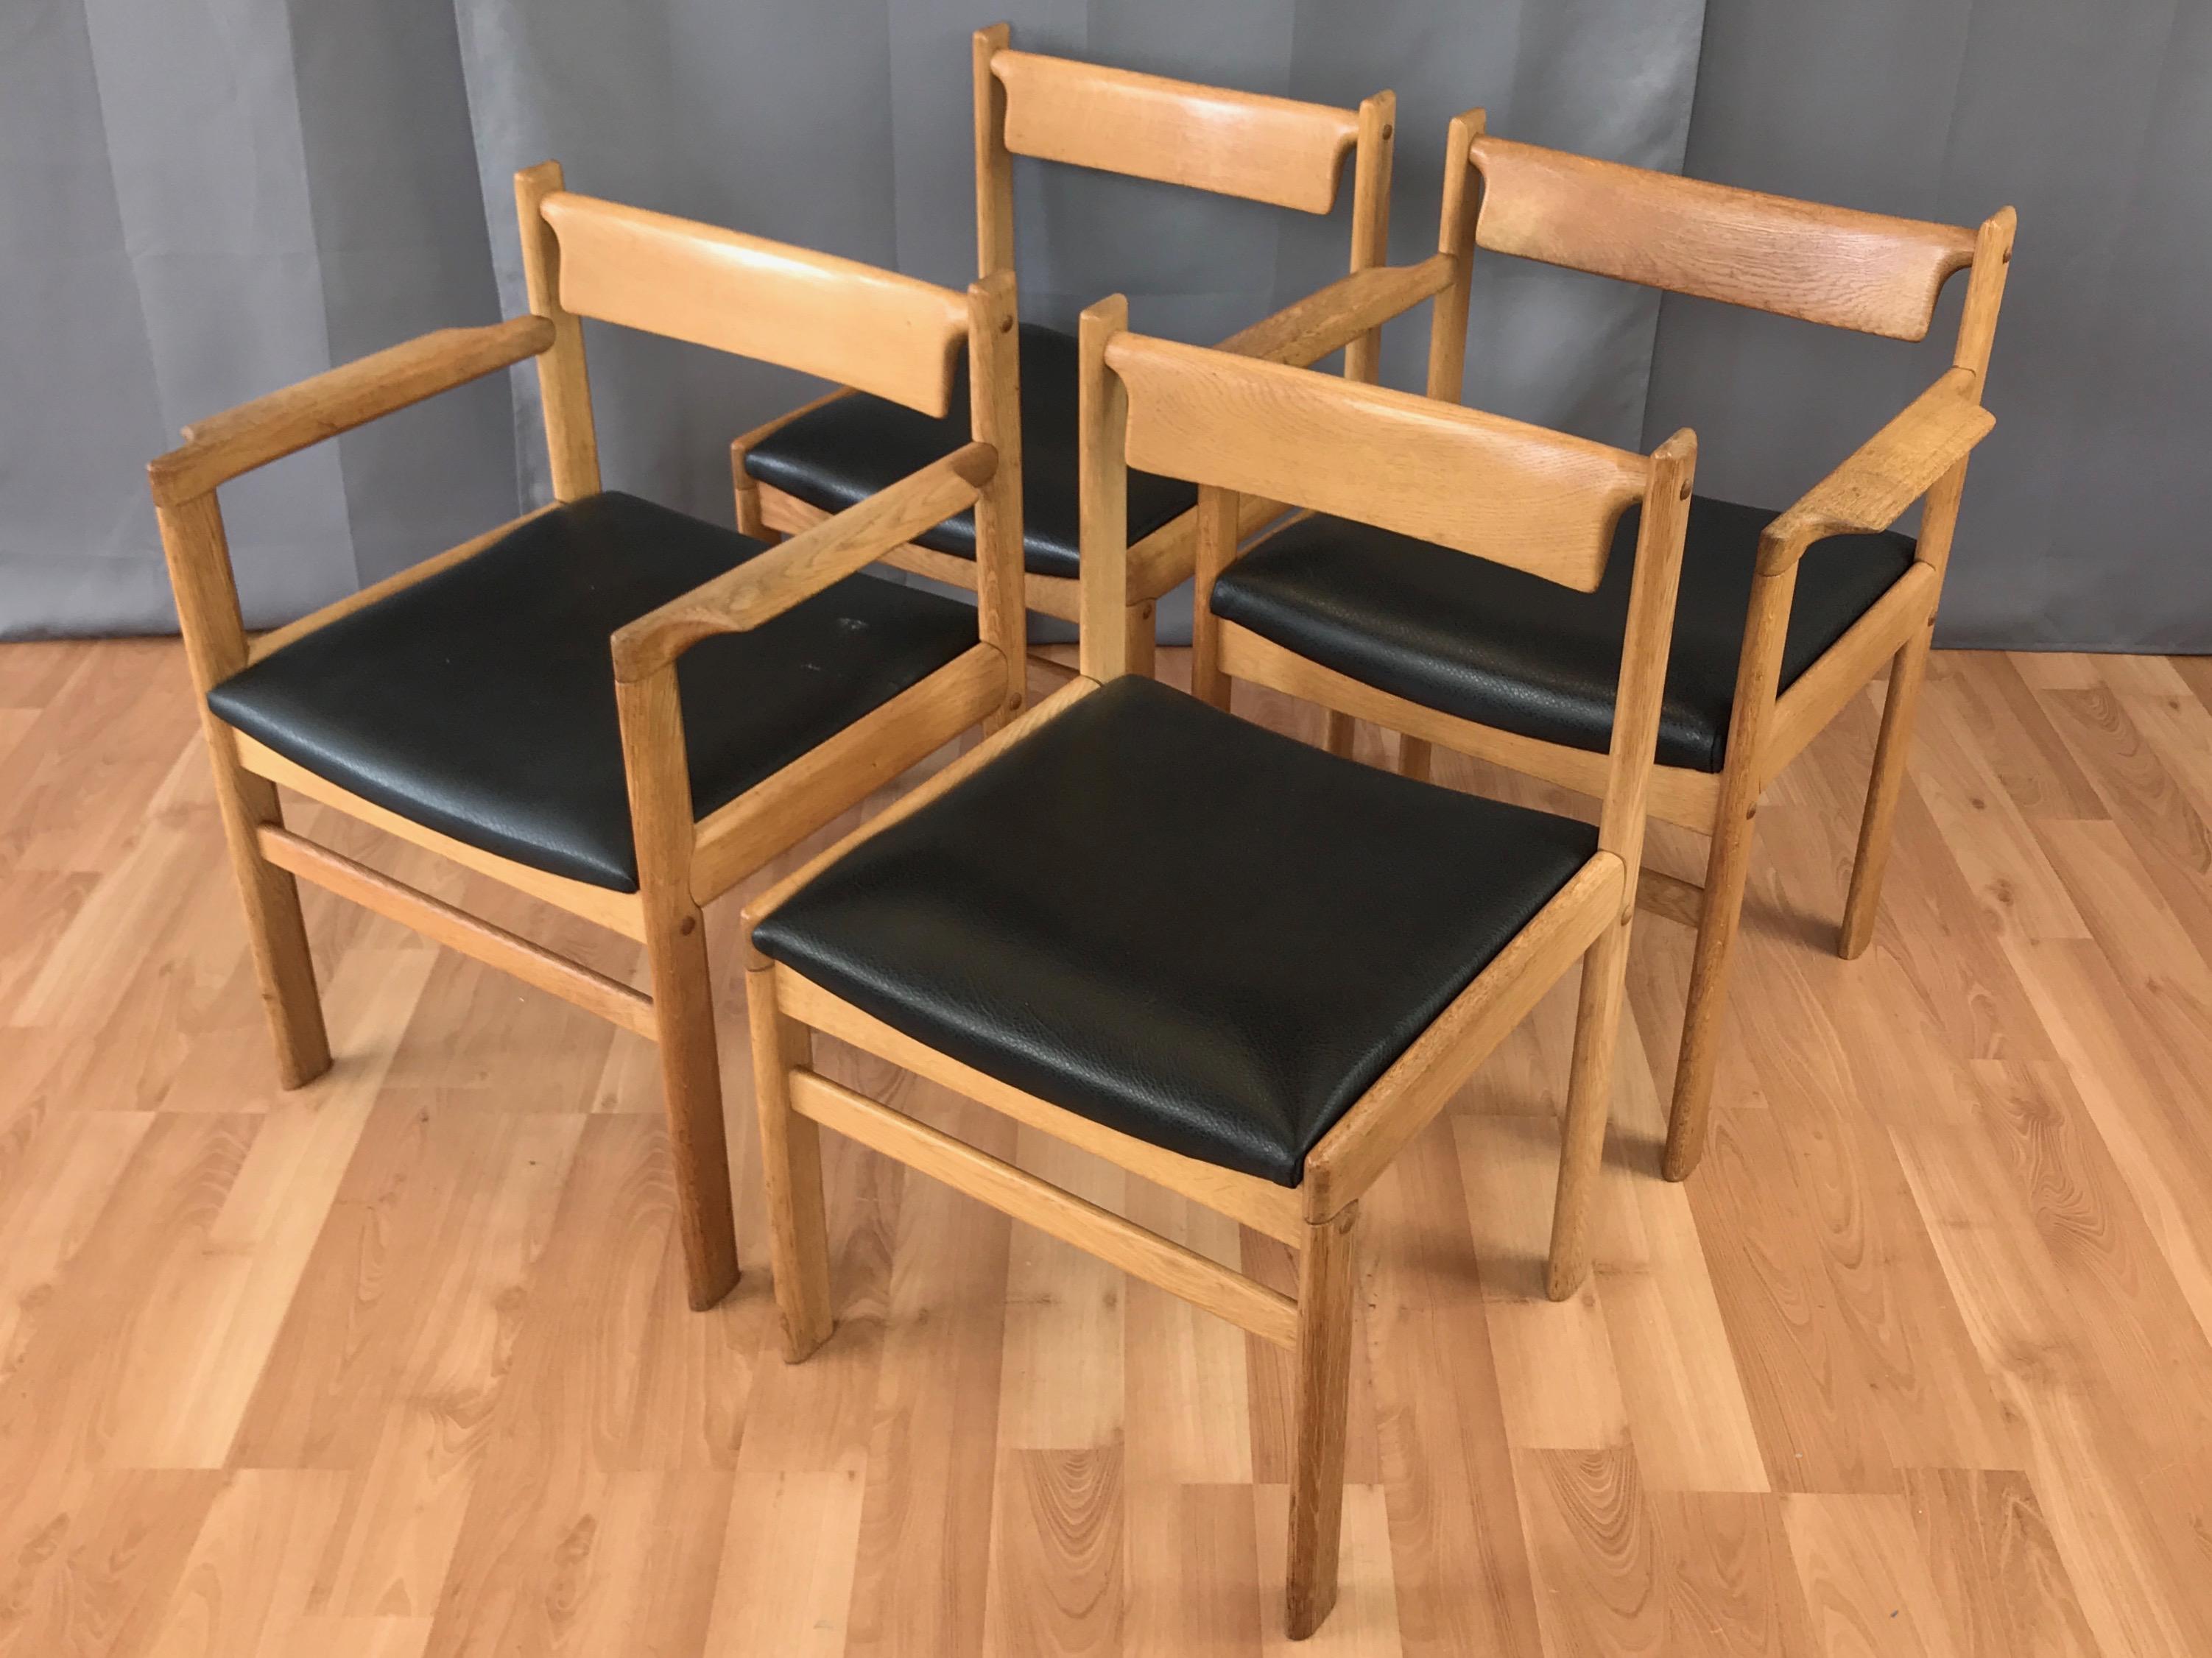 A set of four late 1960s oak dining chairs by Hagen International of San Francisco, California.

Solid blonde oak frame with black faux leather seat exhibits a well-crafted and appealingly unpretentious melding of American and Scandinavian